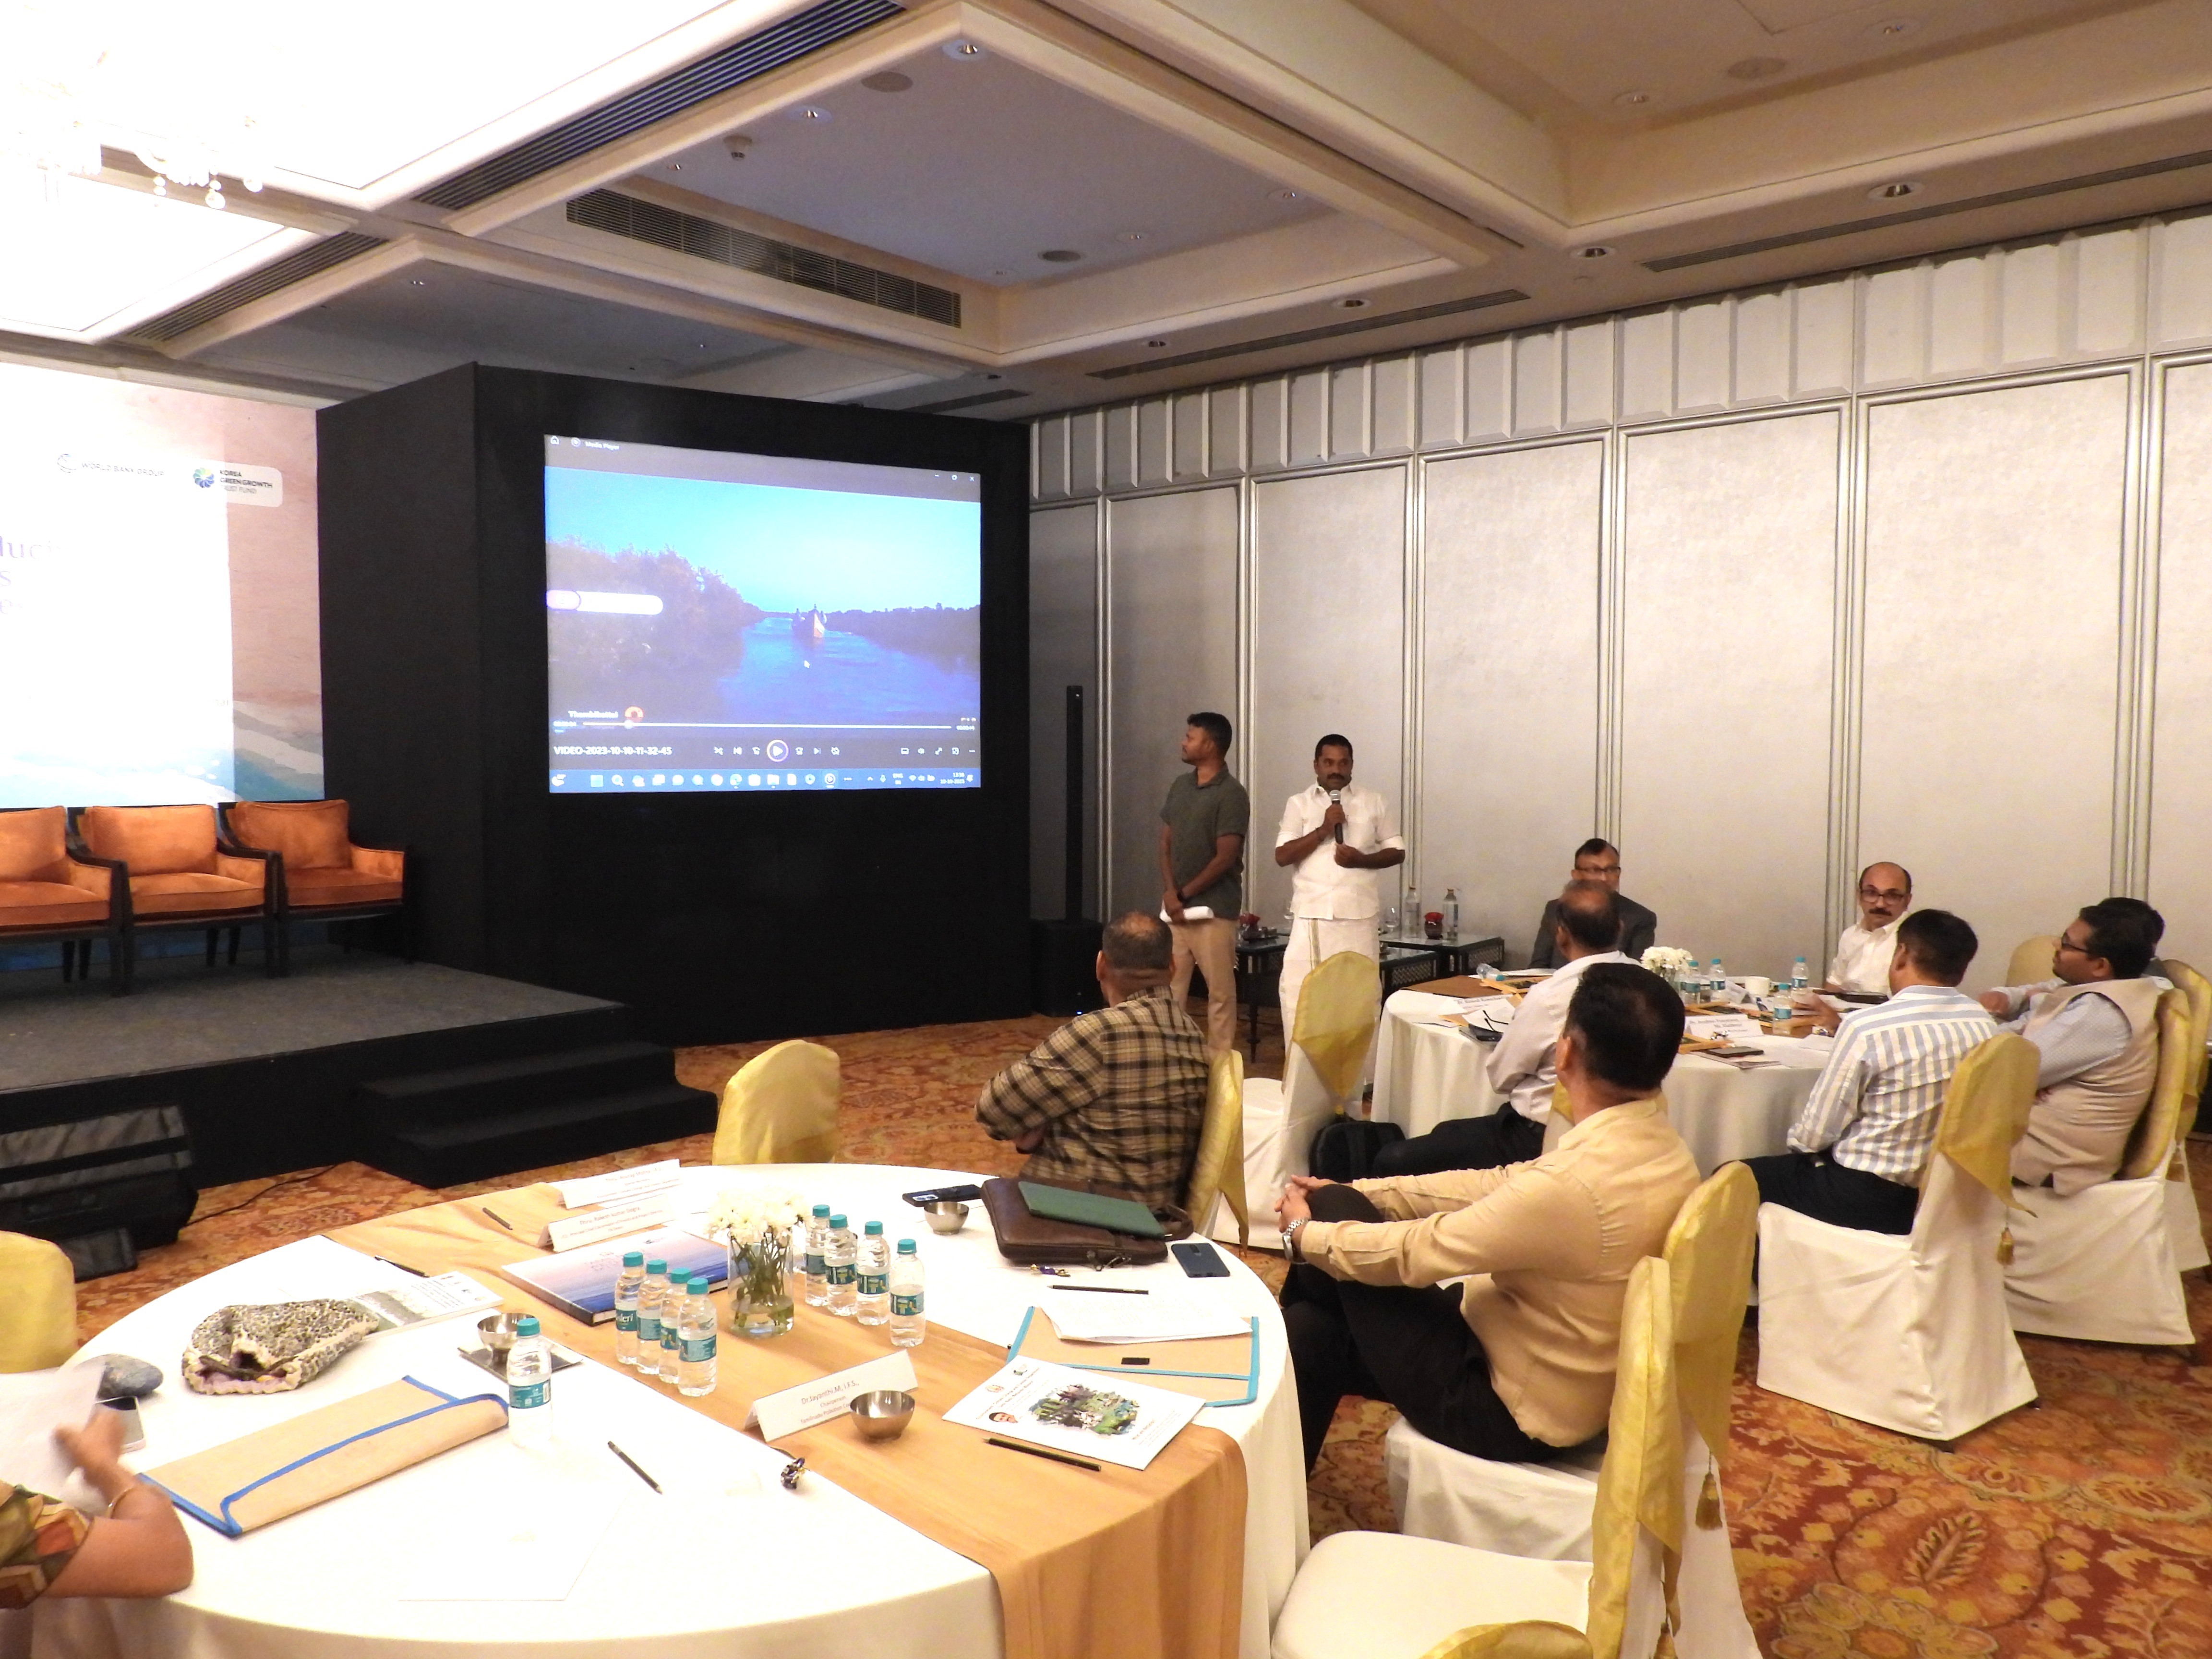 Workshop on Ecosystem-Based Approaches for Reducing the Climate Vulnerability and Wise Use of Coastal Wetlands Through Community Participation